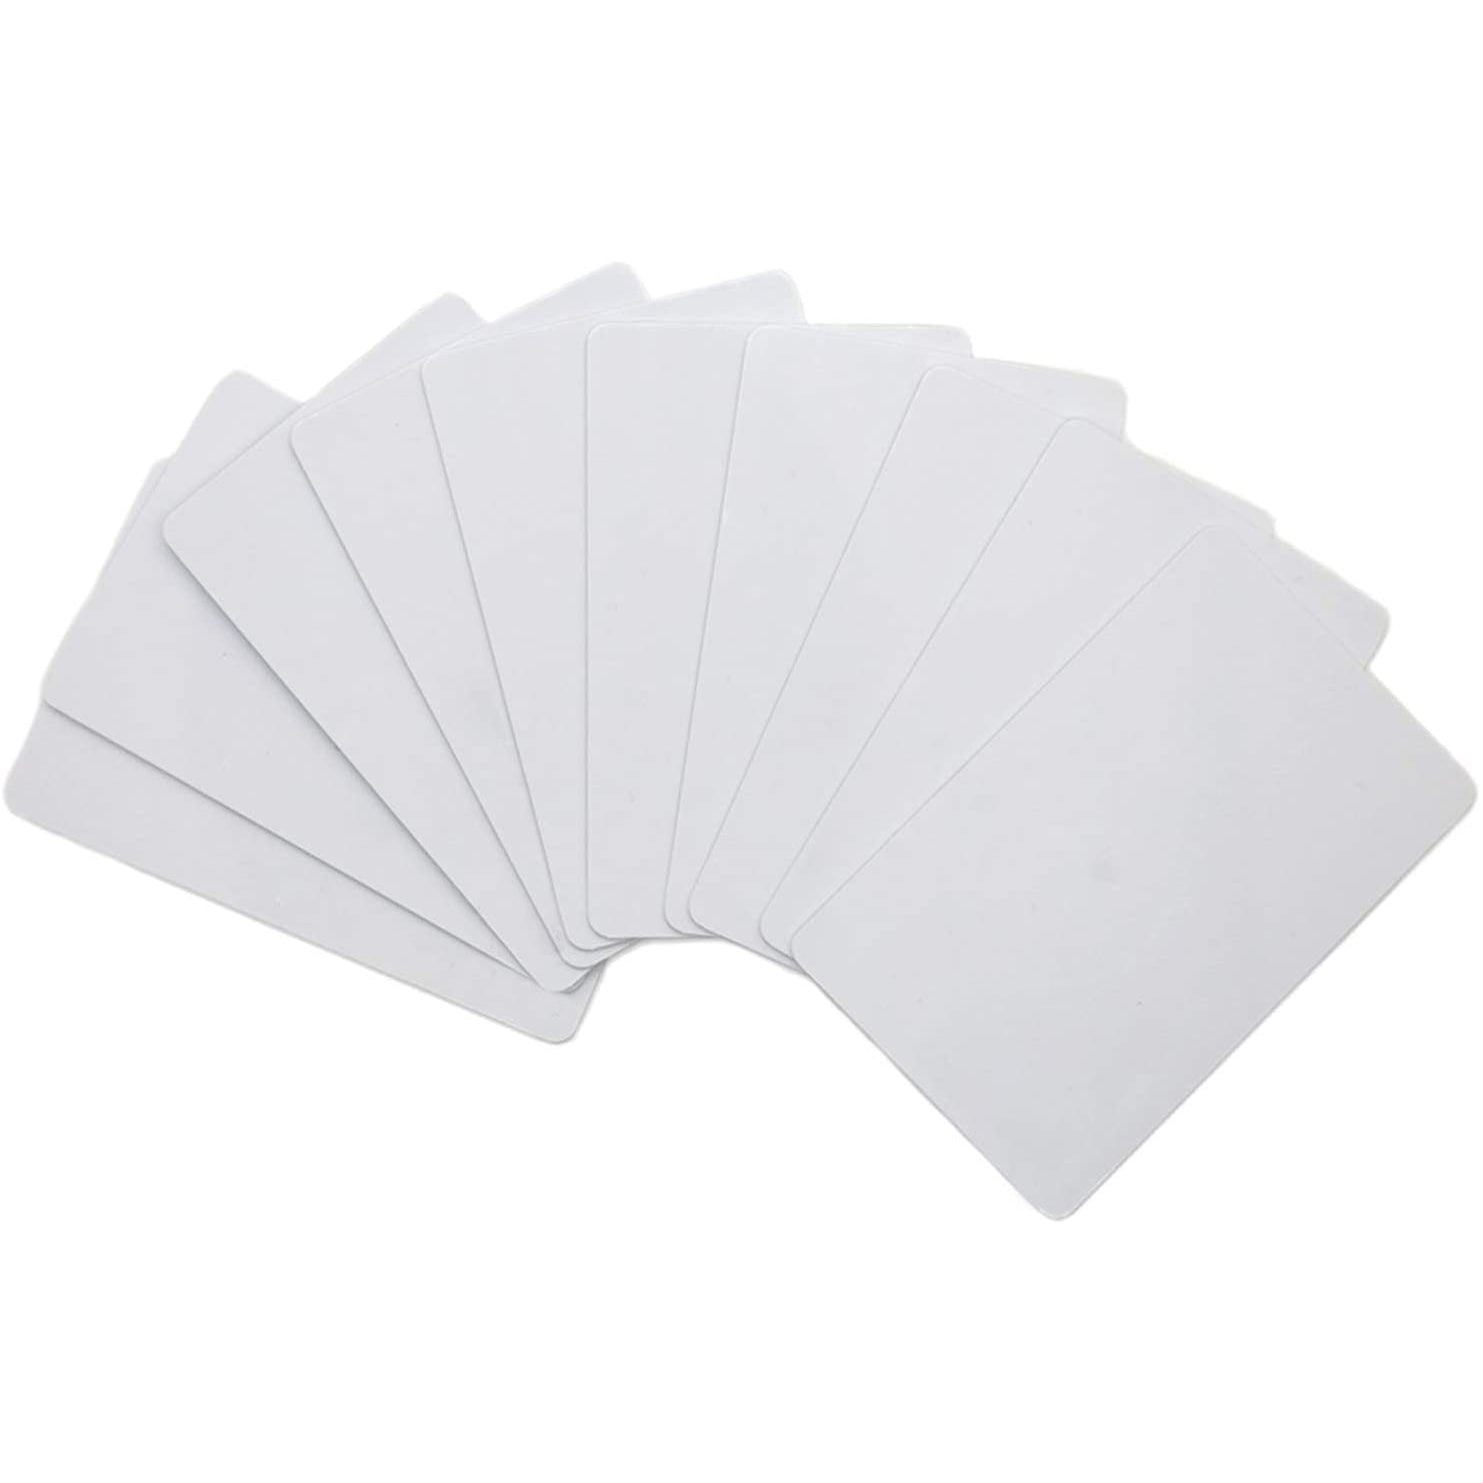 Gialer Premium White Blank PVC Cards Graphic Quality Plastic CR80 30mil Identification Badges Card